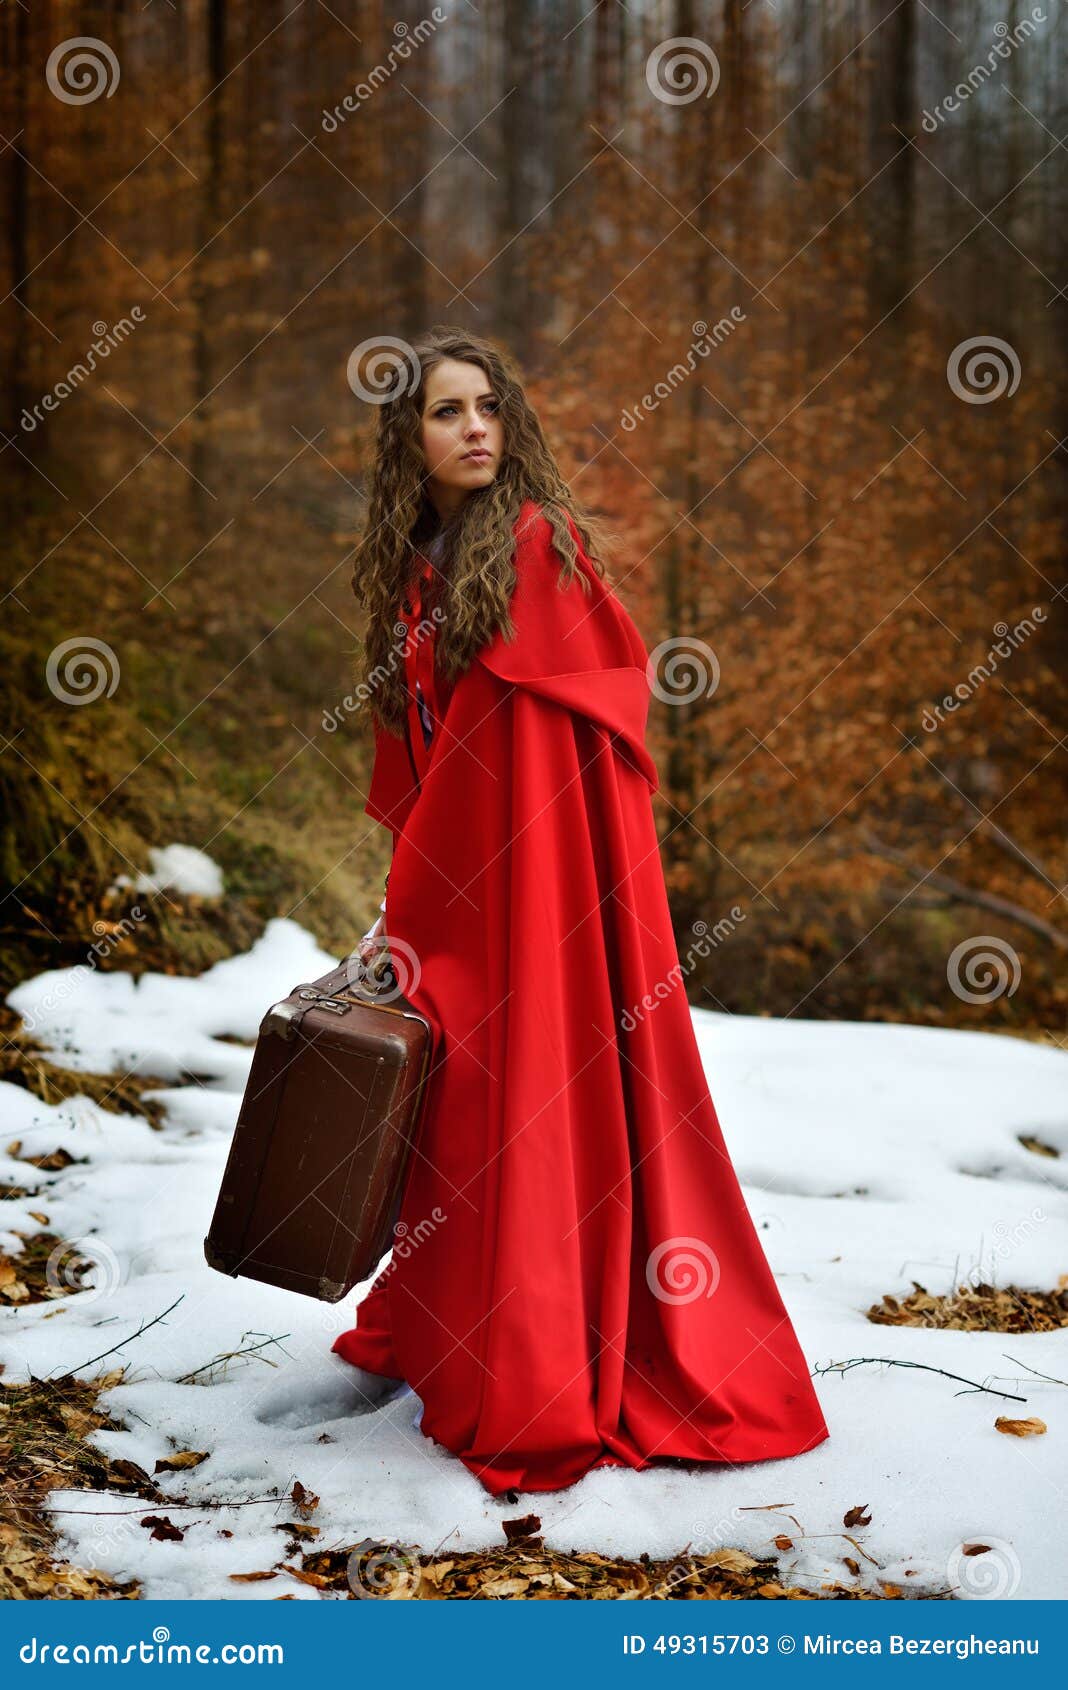 beautiful woman with red cloak and suitcase alone in the woods